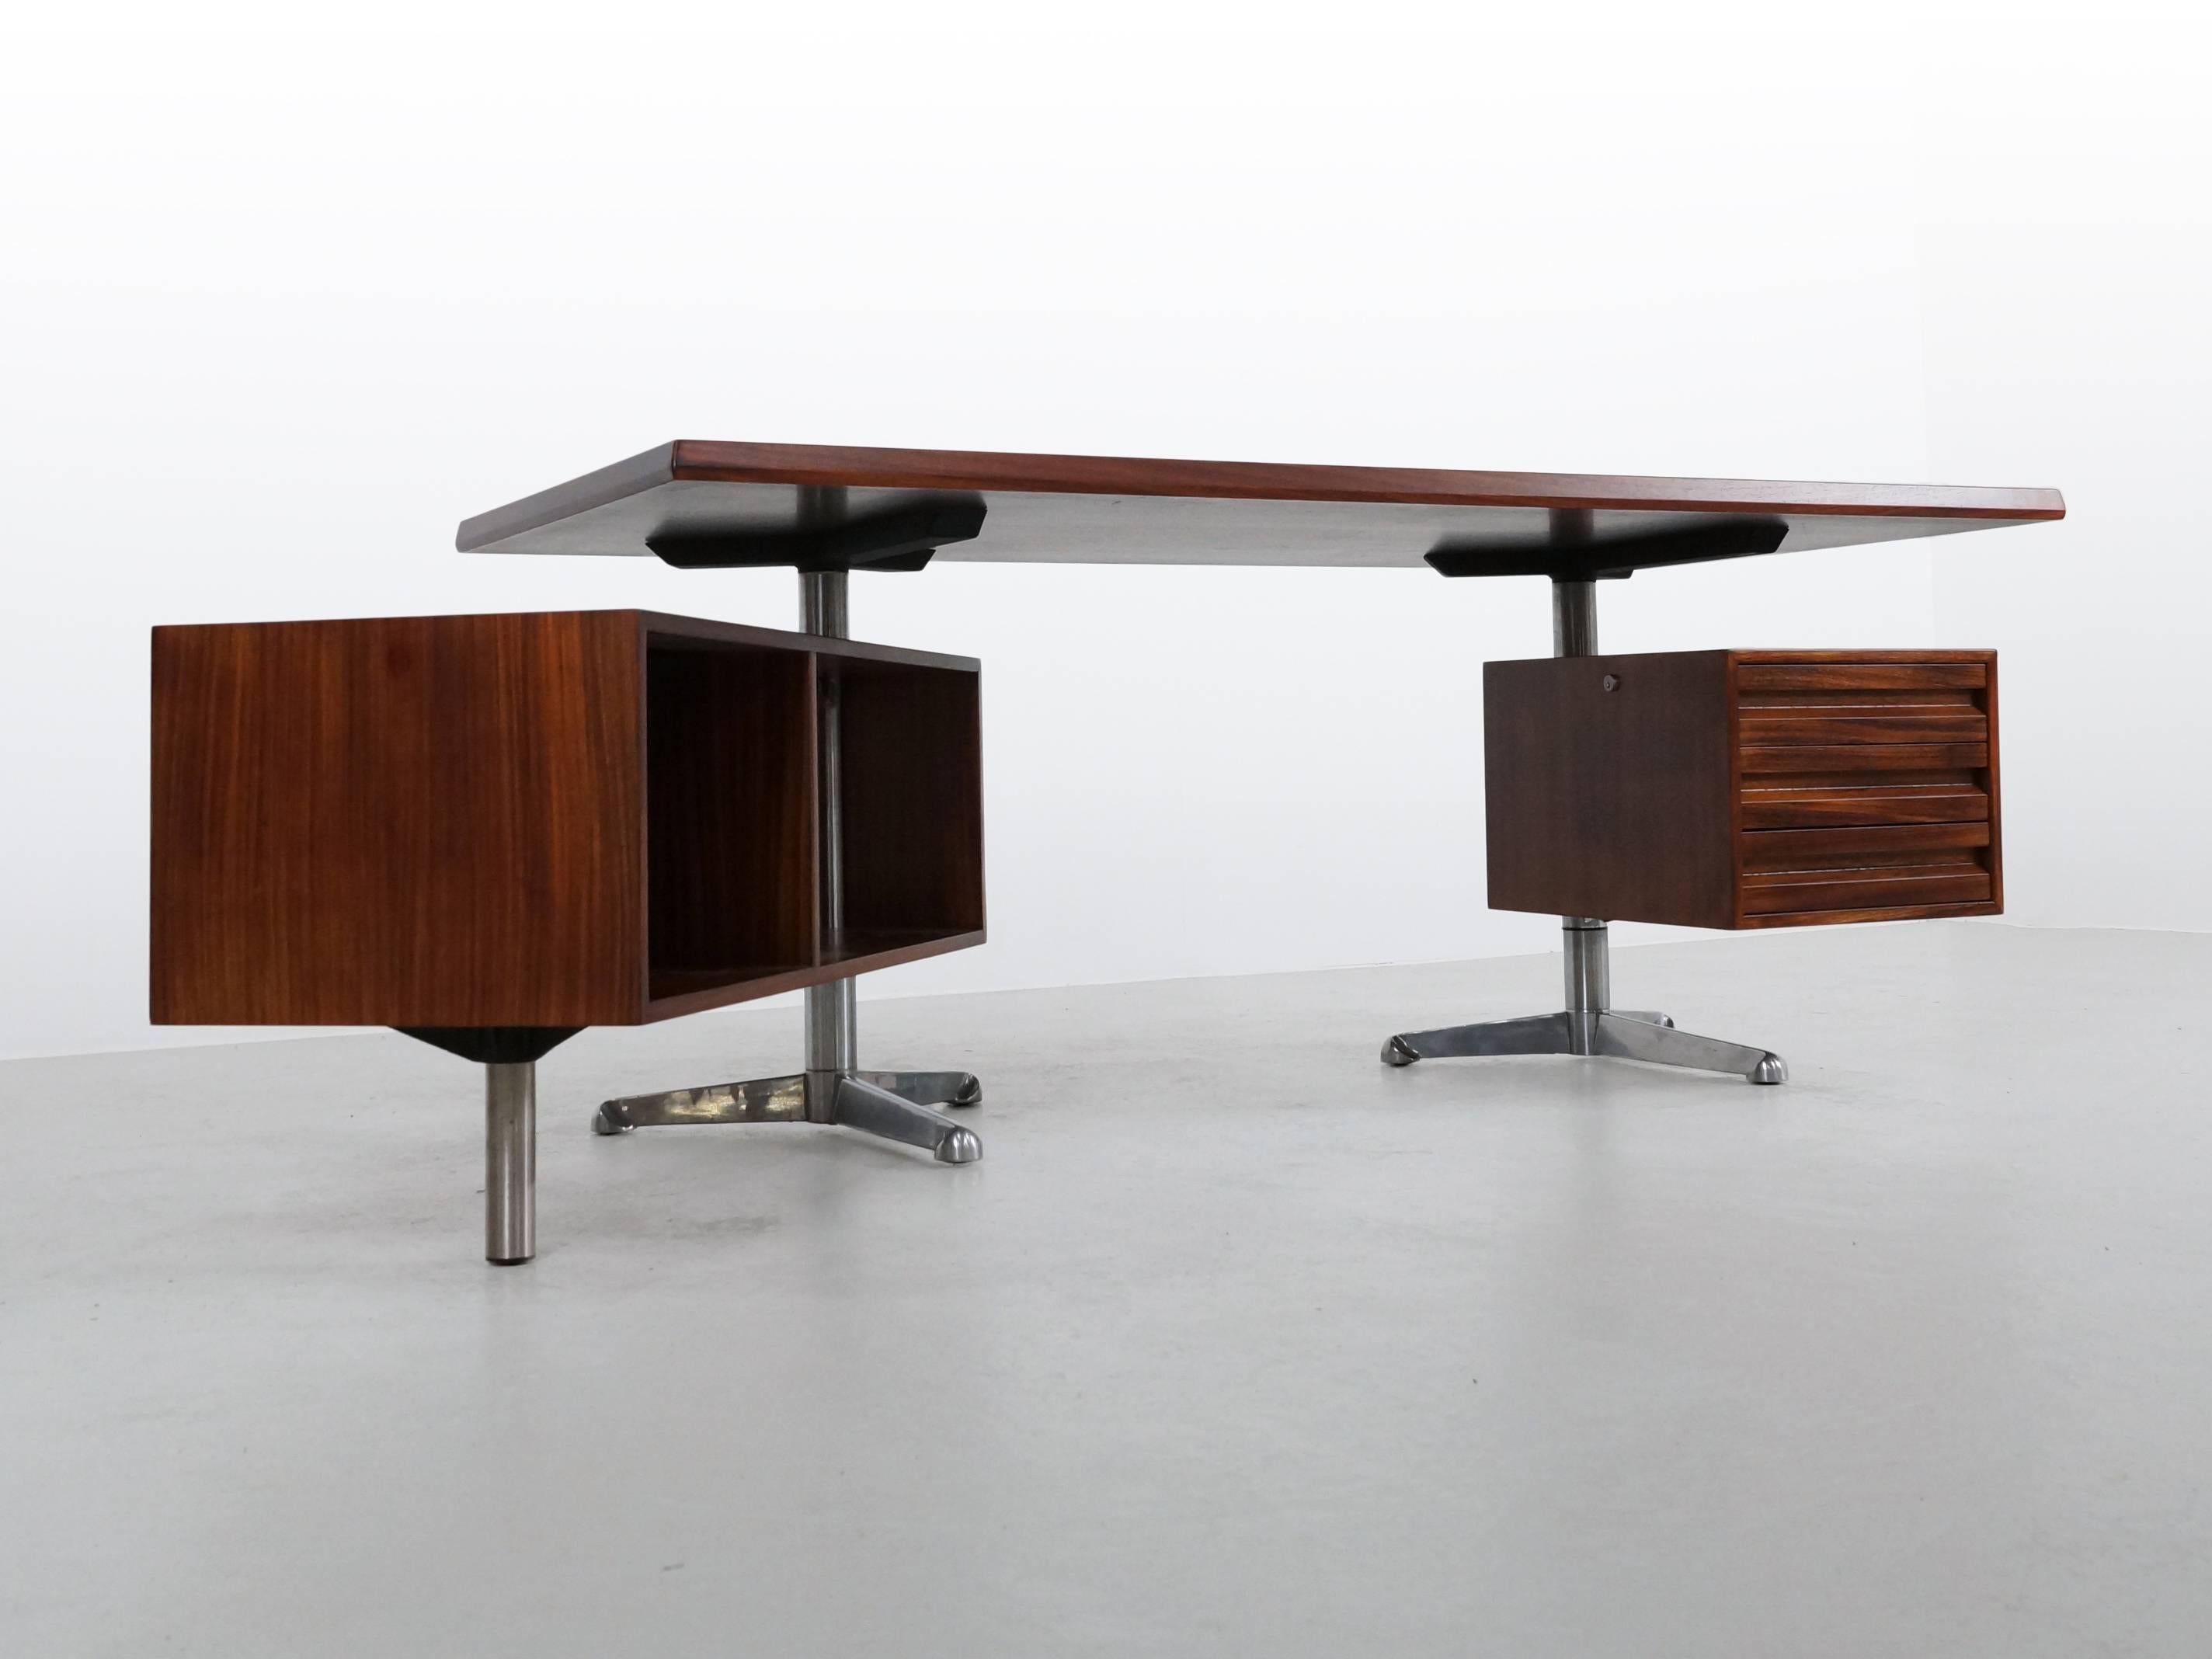 Beautiful rosewood Tecno Desk by Osvaldo Borsani. This desk has one drawer cabinet on the right side, and one large cabinet with storage on the left side. The left cabinet has been customized by Tecno as a small open drink cabinet with a glass